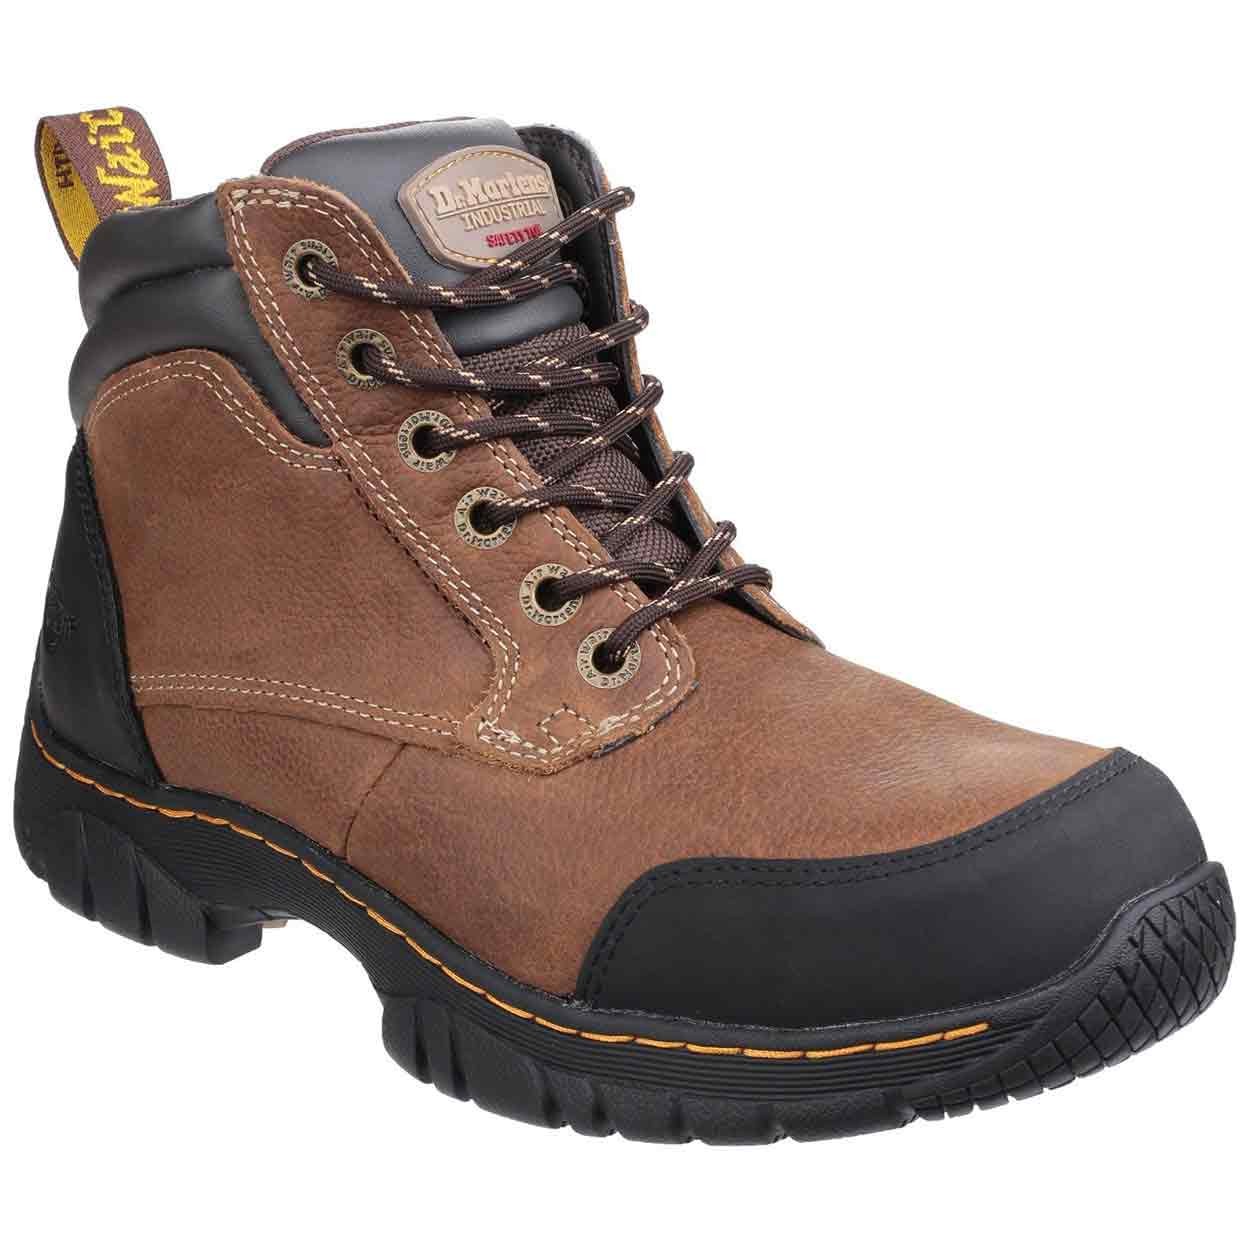 Dr Martens Riverton Brown SB - Standard Safety Boots - Mens Safety Boots &  Shoes - Safety Footwear - Best Workwear